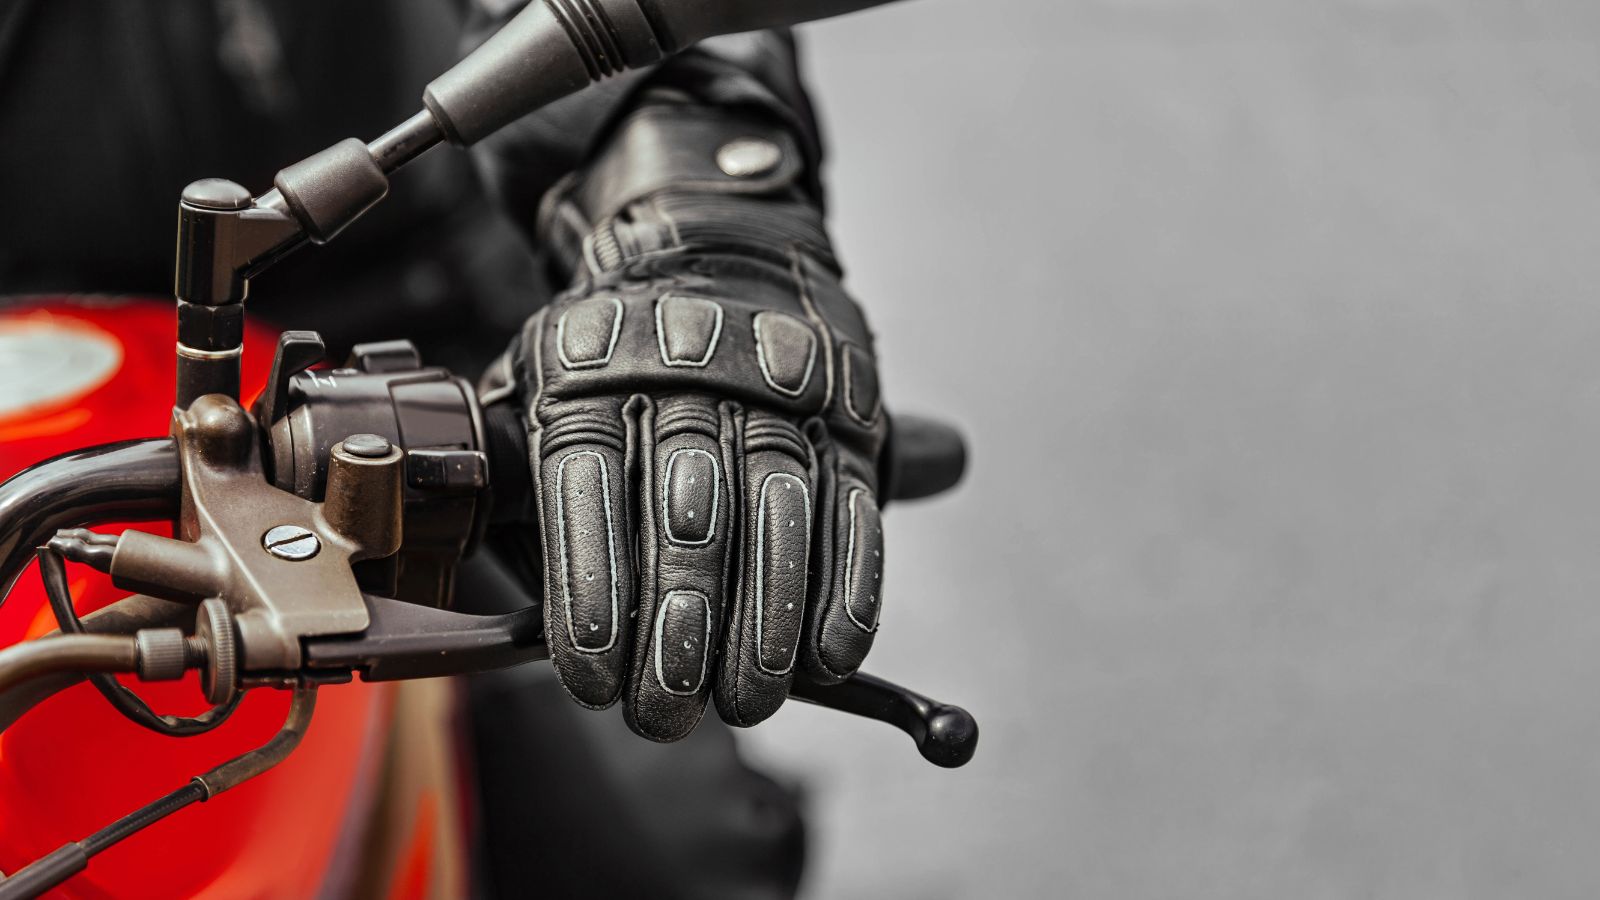 Rev Up Your Ride: The Ultimate Guide to Essential Motorcycling Gear Unveiled